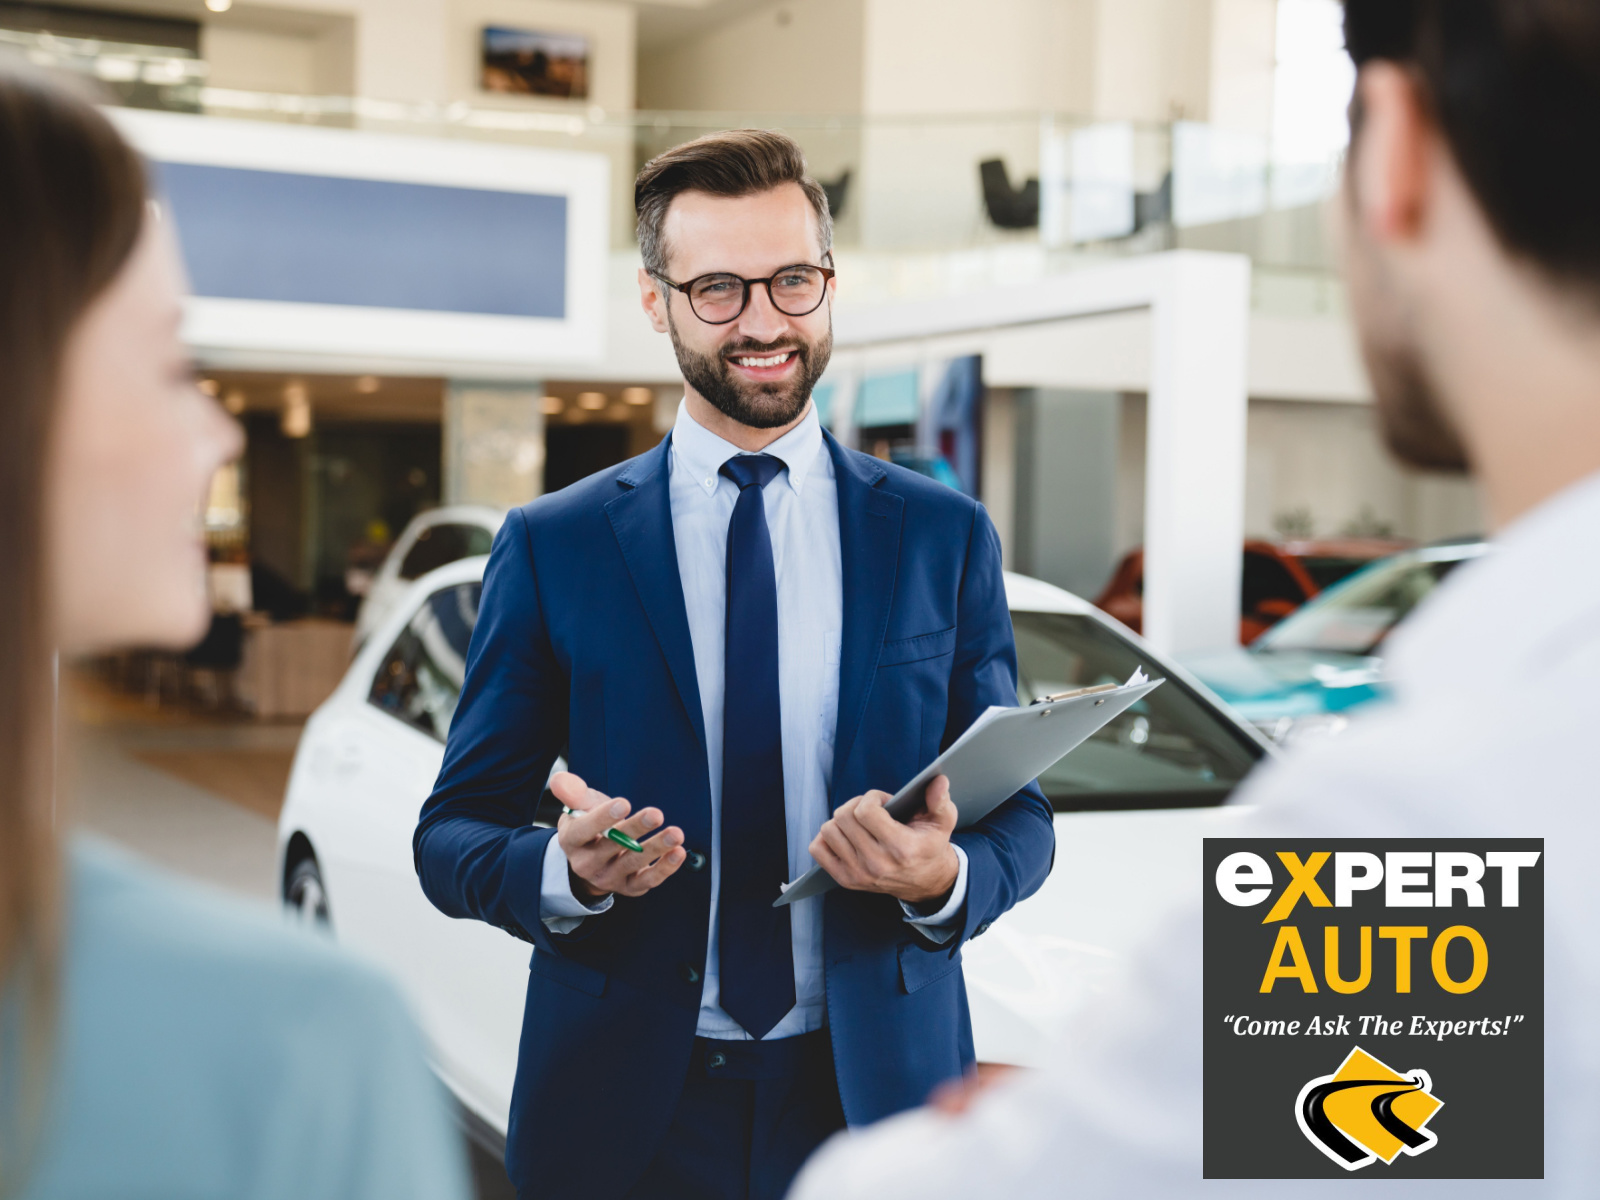 Embracing Affordable Excellence and Breaking Stigmas at Expert Auto